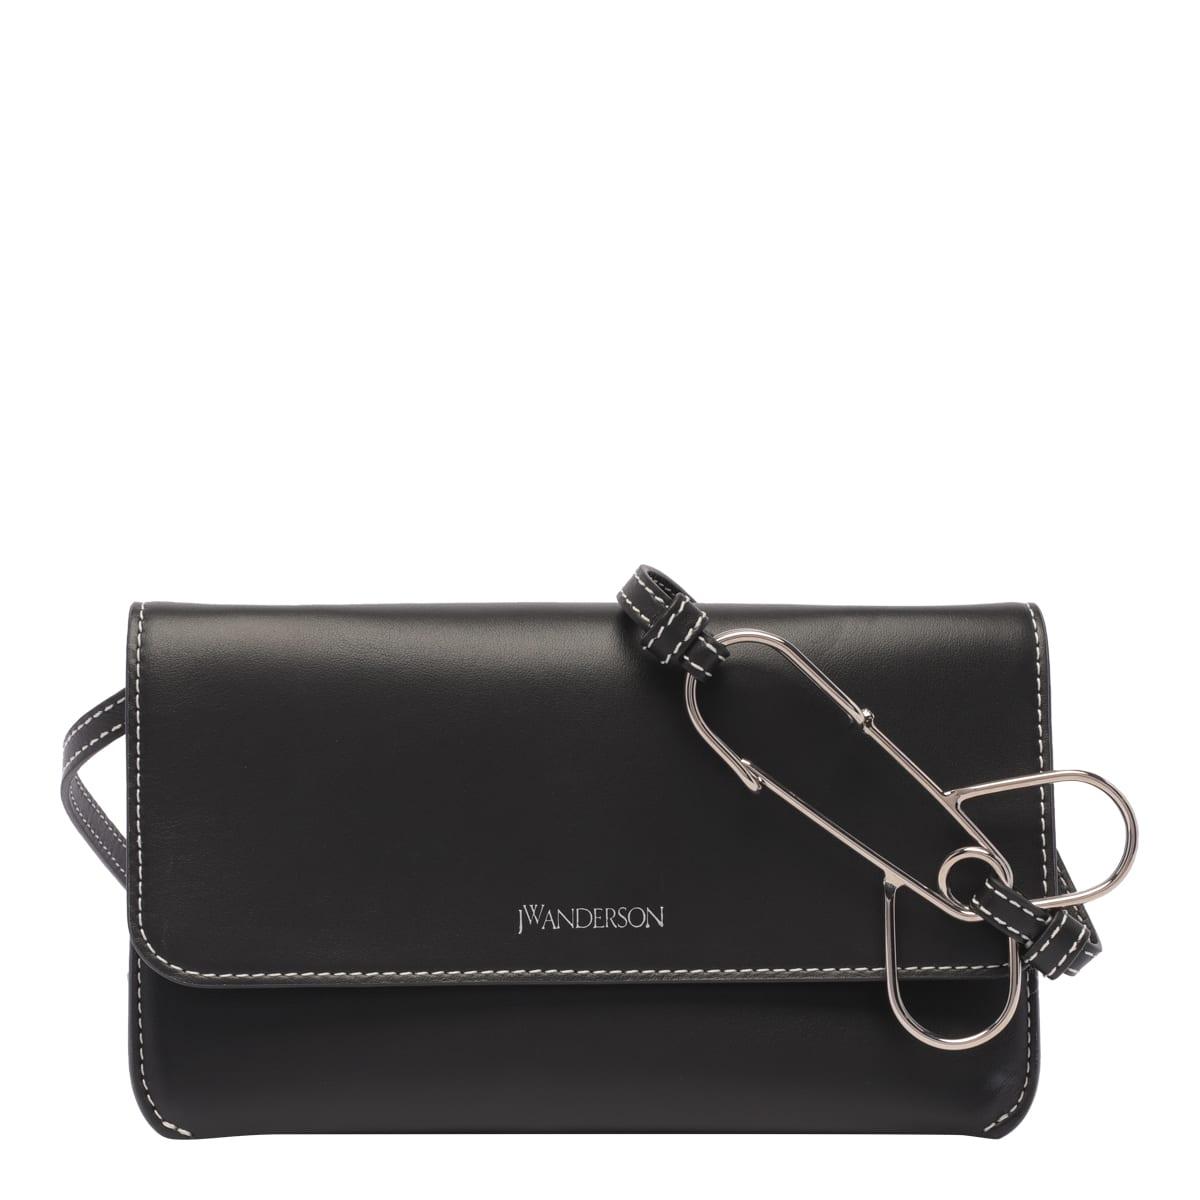 LEATHER CARDHOLDER WITH PENIS PIN STRAP in black